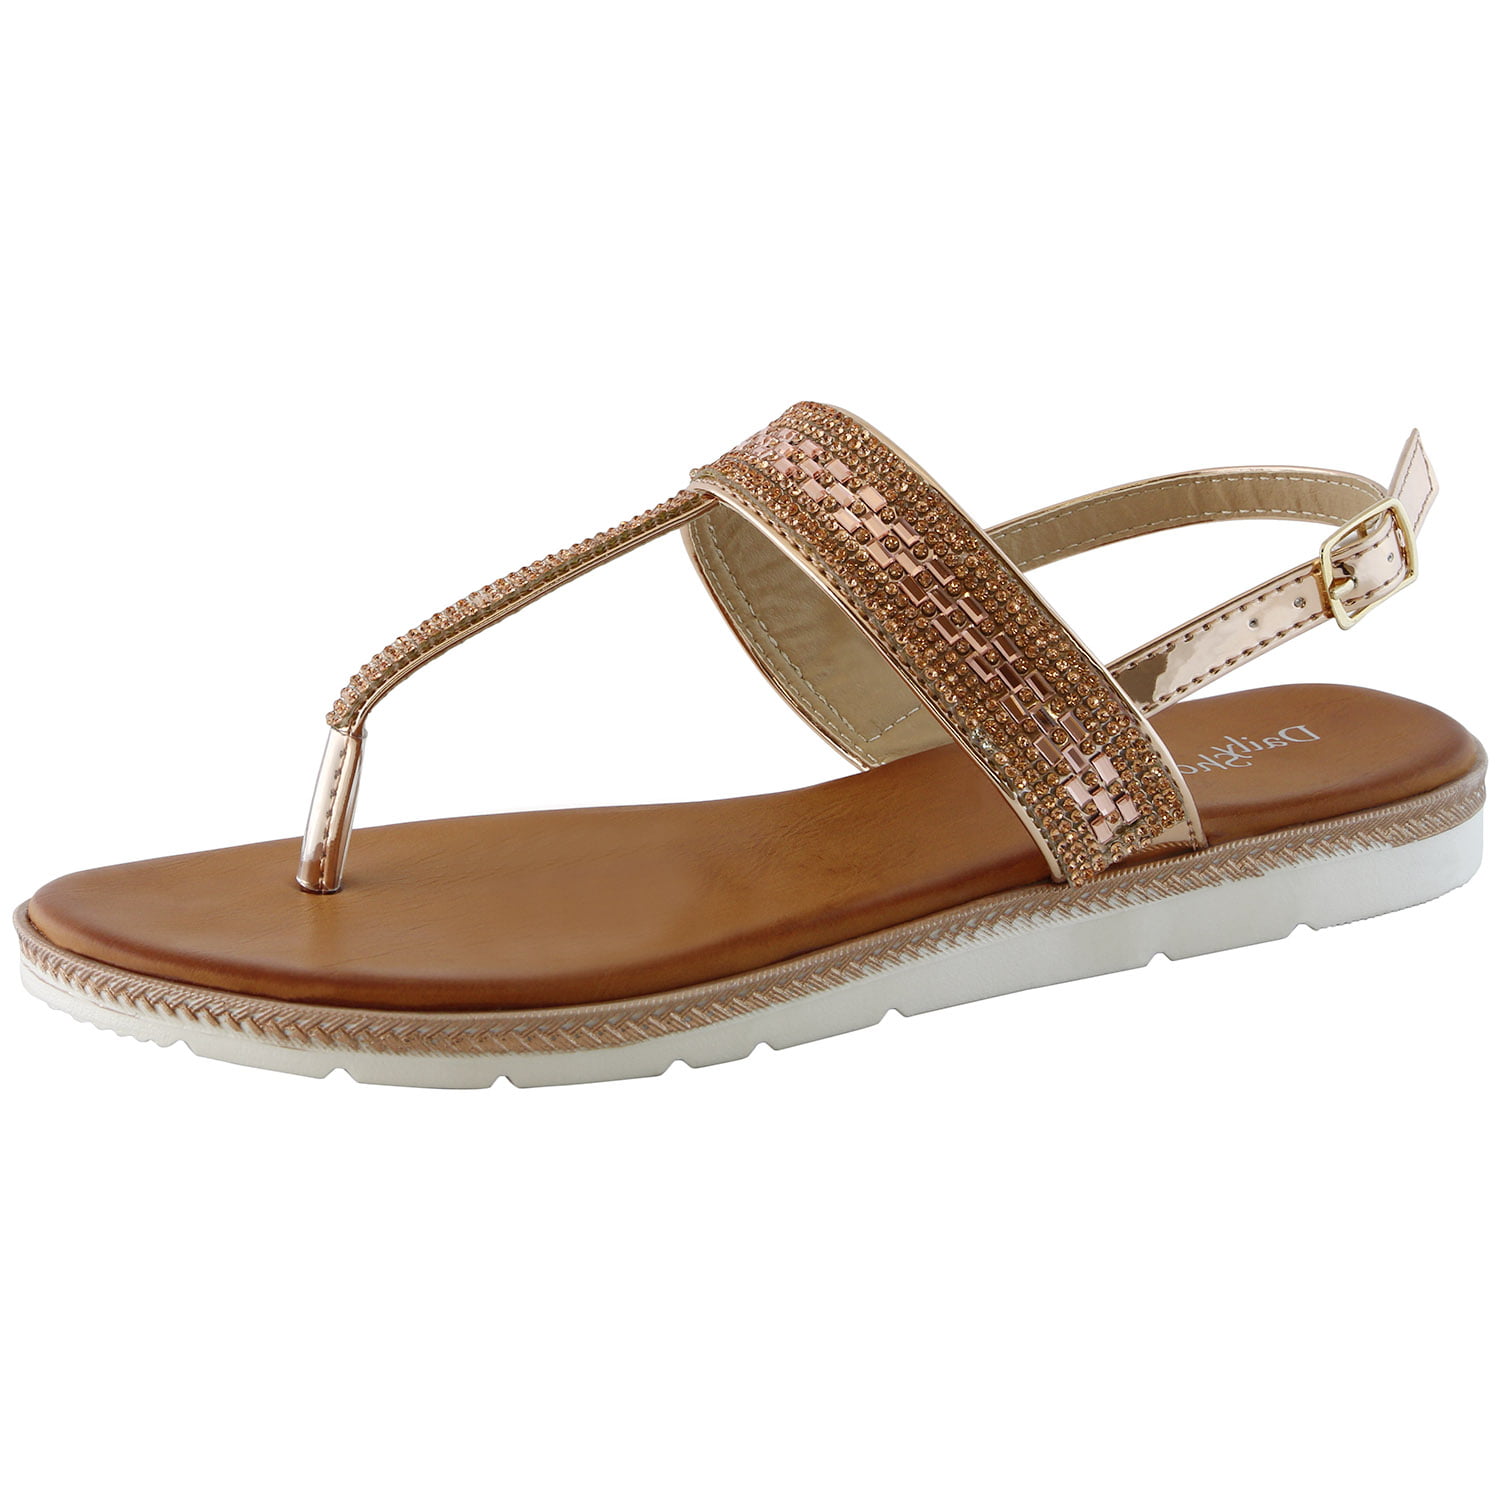 Dailyshoes Thong Sandals With Rhinestones Flat Sandal T-strap Flip-flop ...